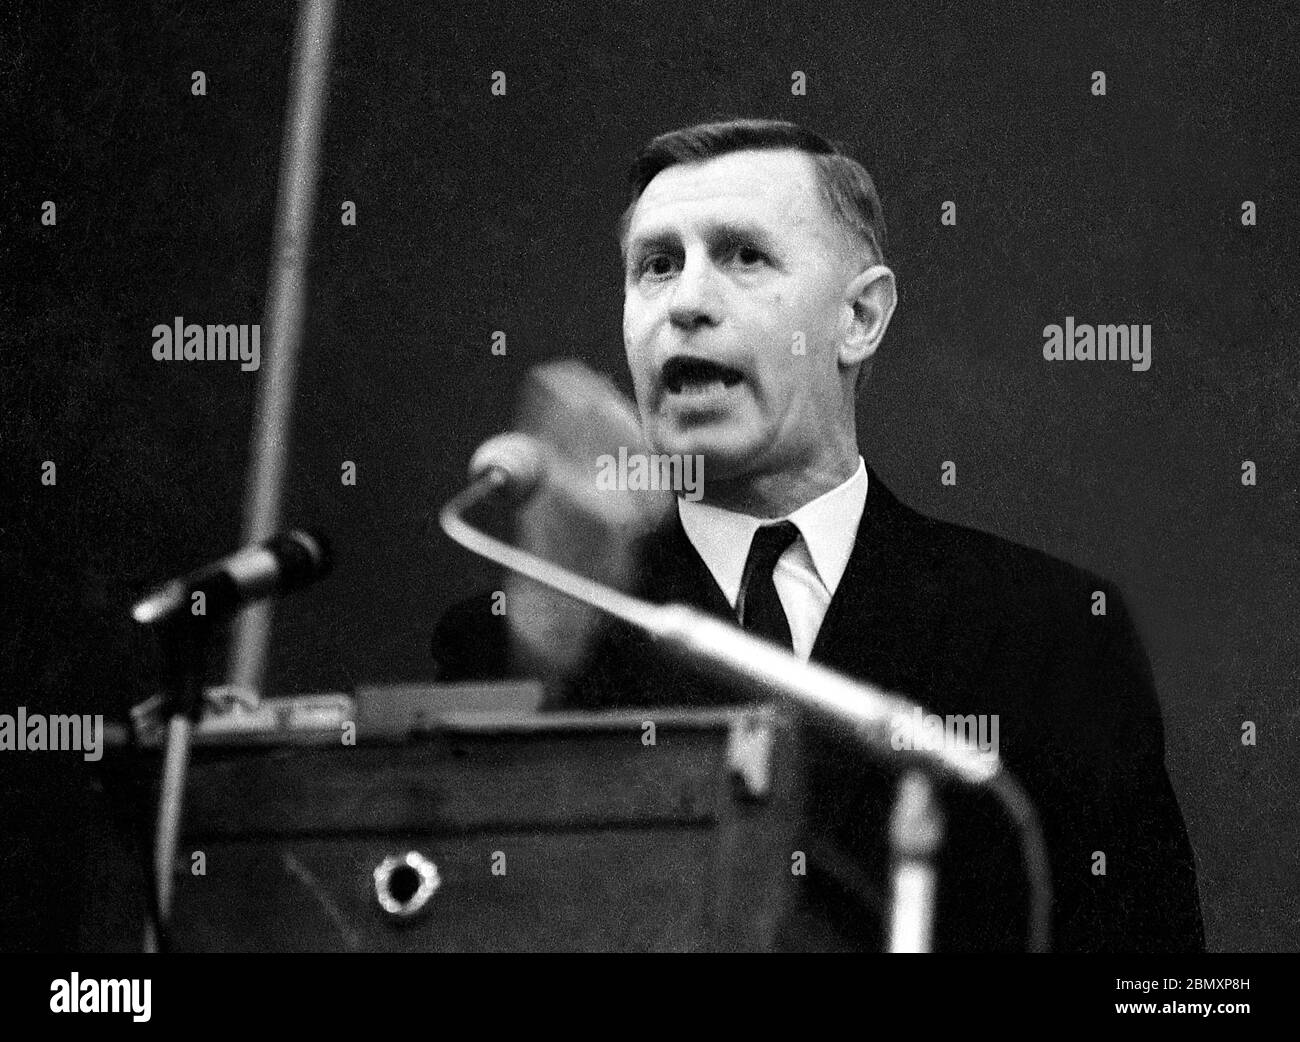 Jeffrey Hamm, General Secretary of Oswald Mosley’s fascist Union Movement, faces his critics at a special Parliamentary Night debate in Bristol University’s Students Union on 23 January 1970.  A panel of four speakers had been invited to discuss how best to tackle Britain’s problems in the 1970s and there were protests over his inclusion at the start of the meeting, with two students walking out.  The other panellists were Adam Buick, of the Socialist Party; author John Creasey, head of the All Party Alliance; and Peter Hancock, of the Democrats.  A BBC documentary crew filmed the evening.  La Stock Photo